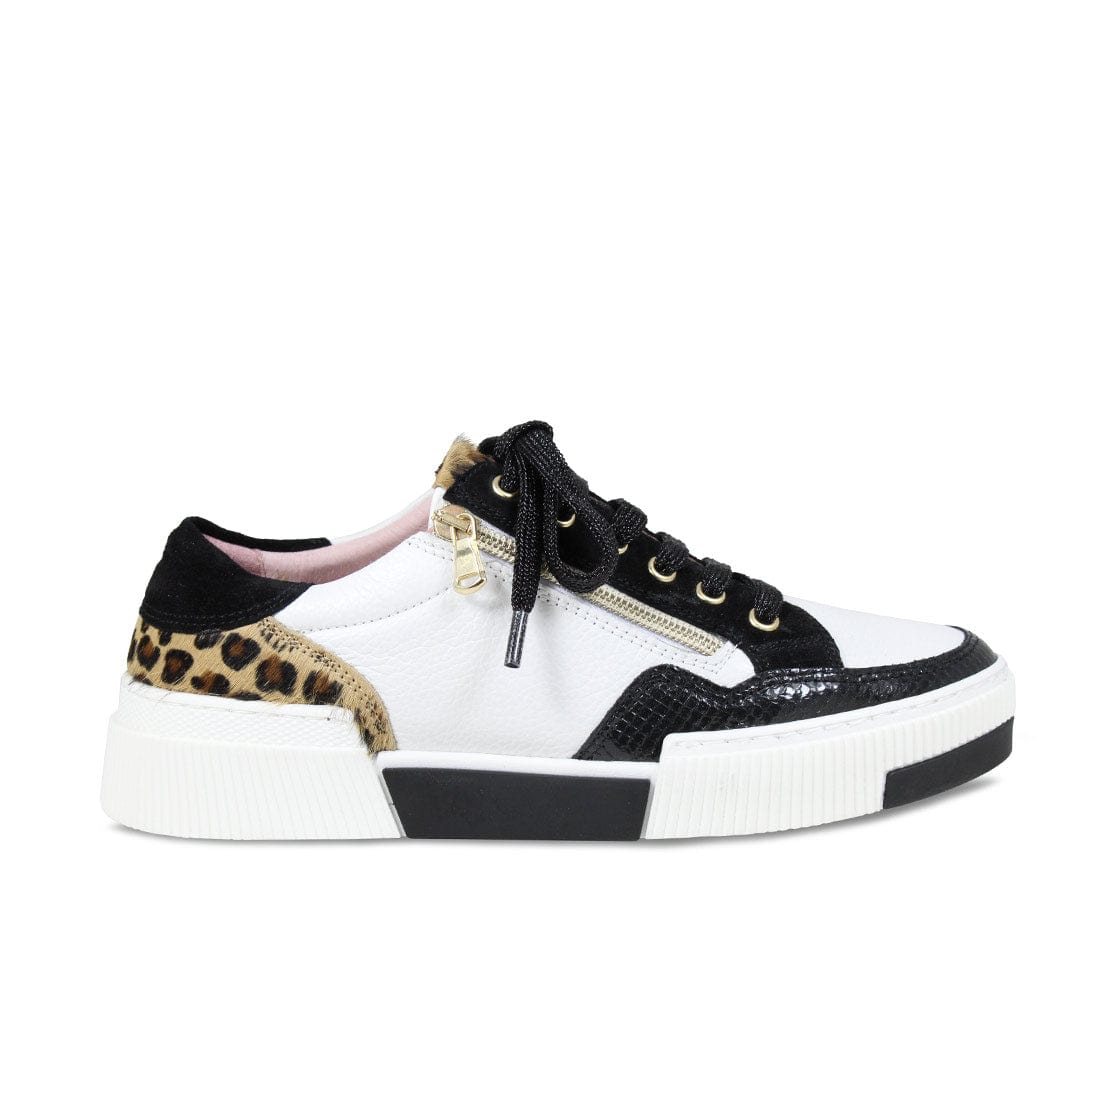 Street: White & Leopard - Fashion Sneakers for Bunions | Sole Bliss ...